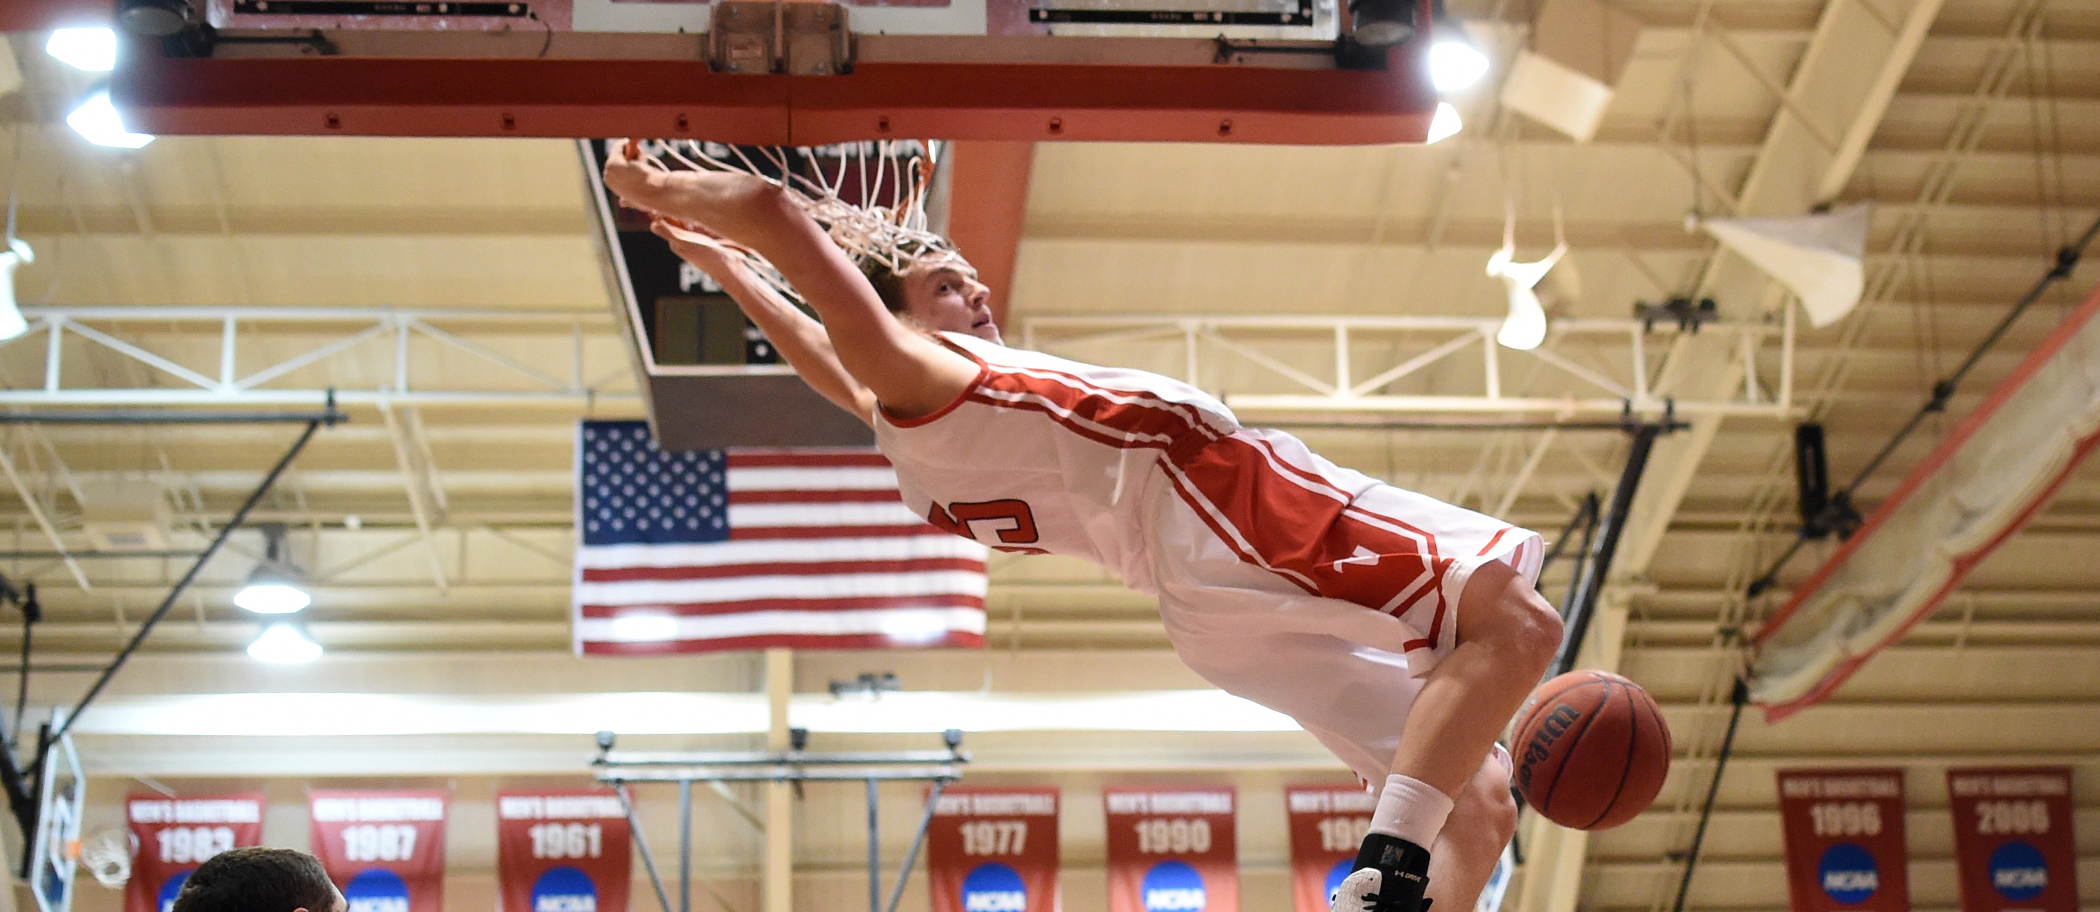 Tigers End Season with NCAC Quarterfinal Loss to Denison, 81-75